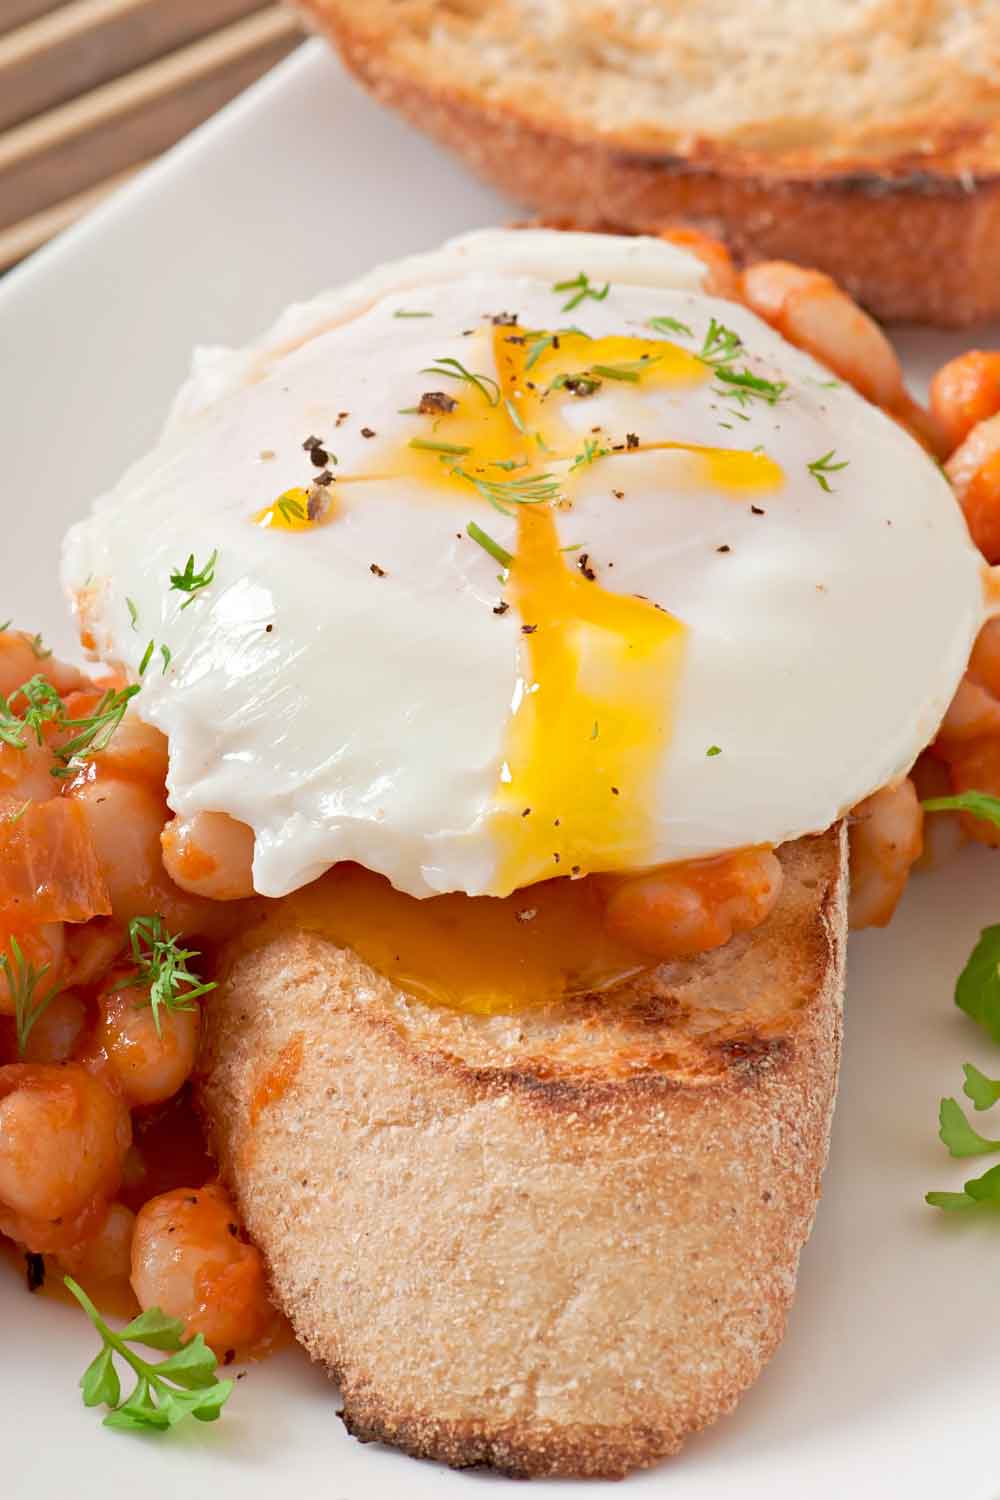 Breakfast Beans with Microwave-Poached Egg